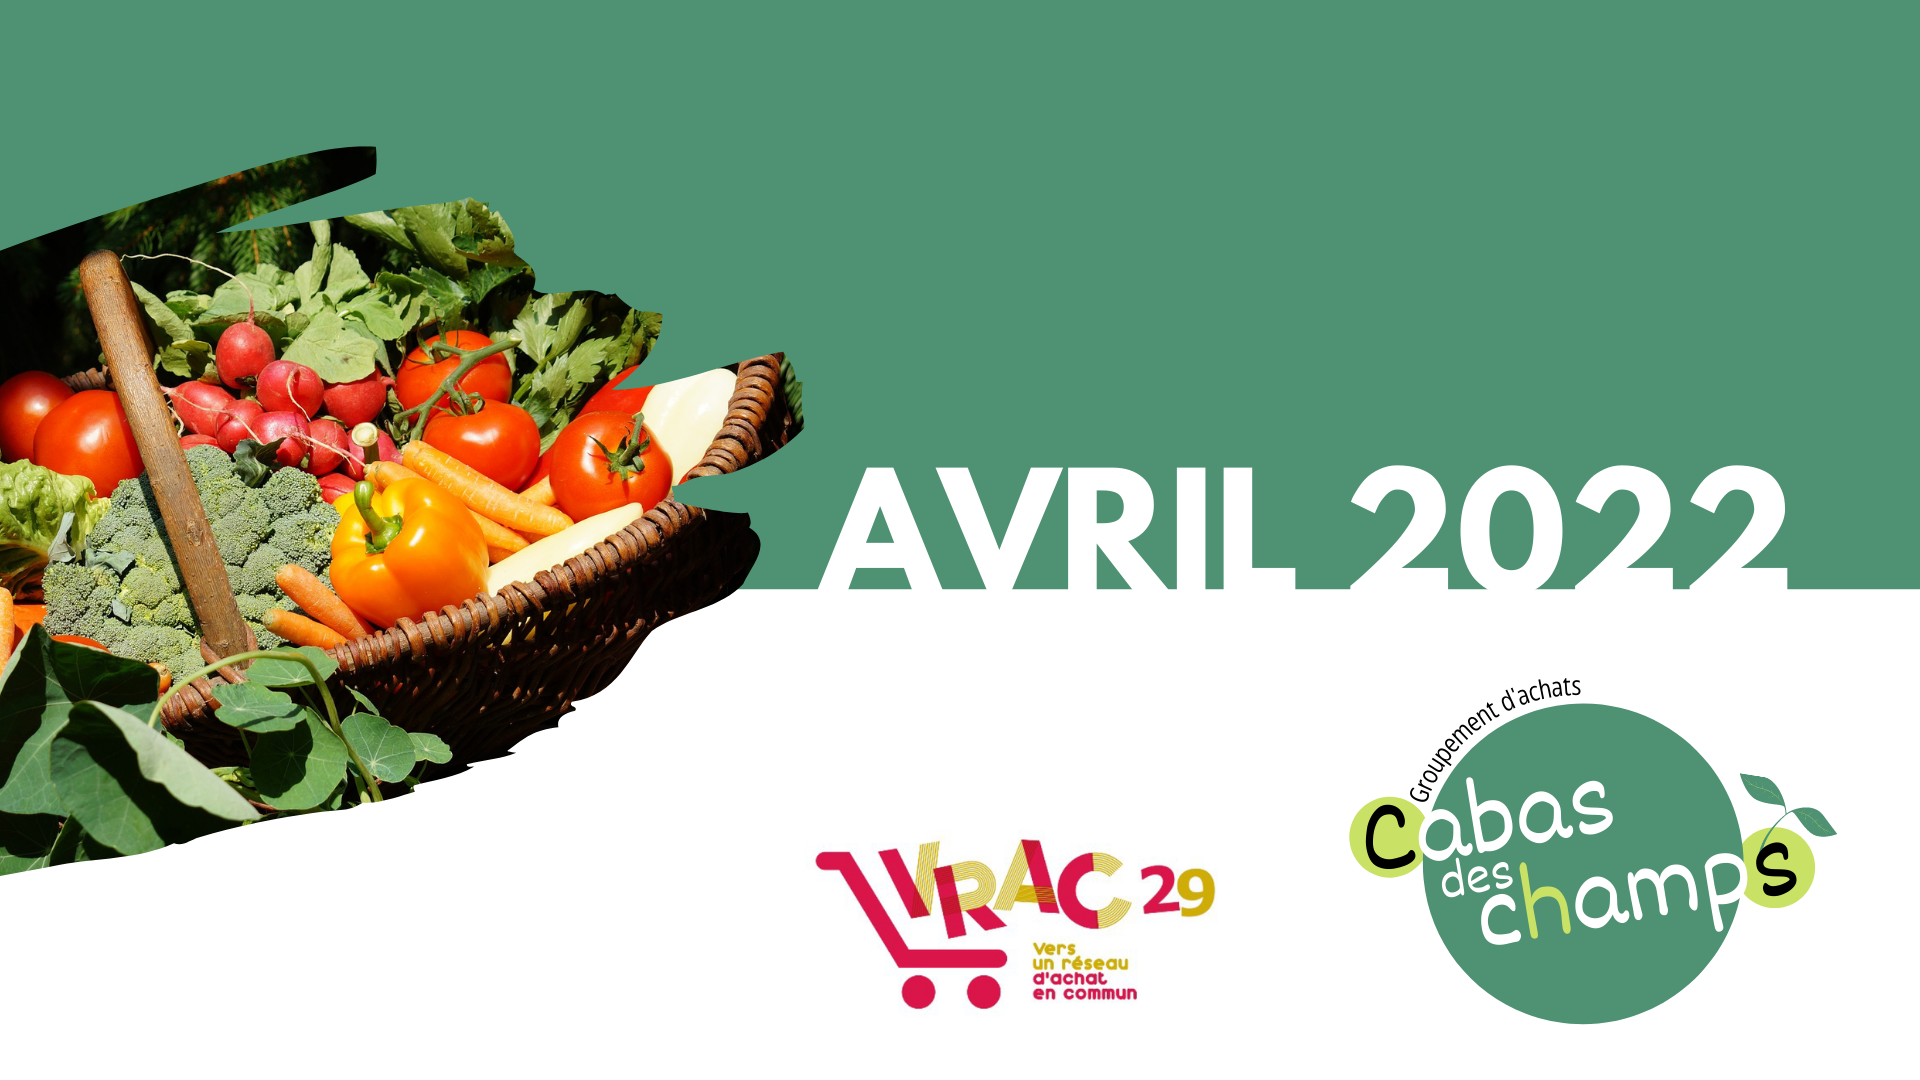 You are currently viewing Cabas des champs et Vrac29 – Avril 2022